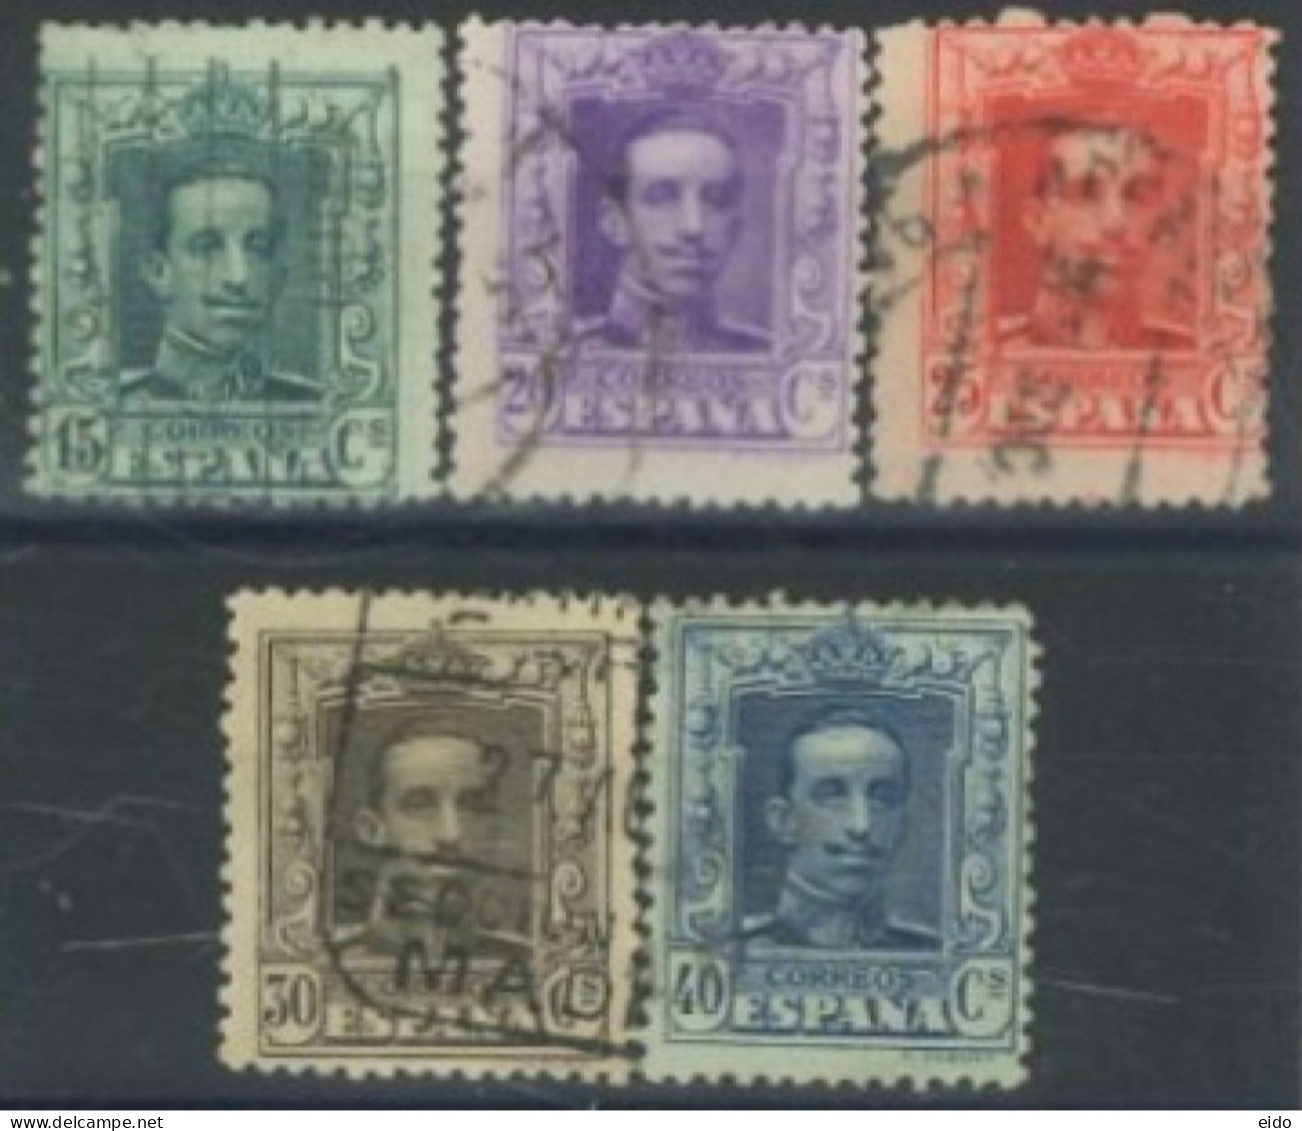 SPAIN, 1922/26, KING ALFONSO XIII STAMPS SET OF 5 # 336/40, USED. - Usados